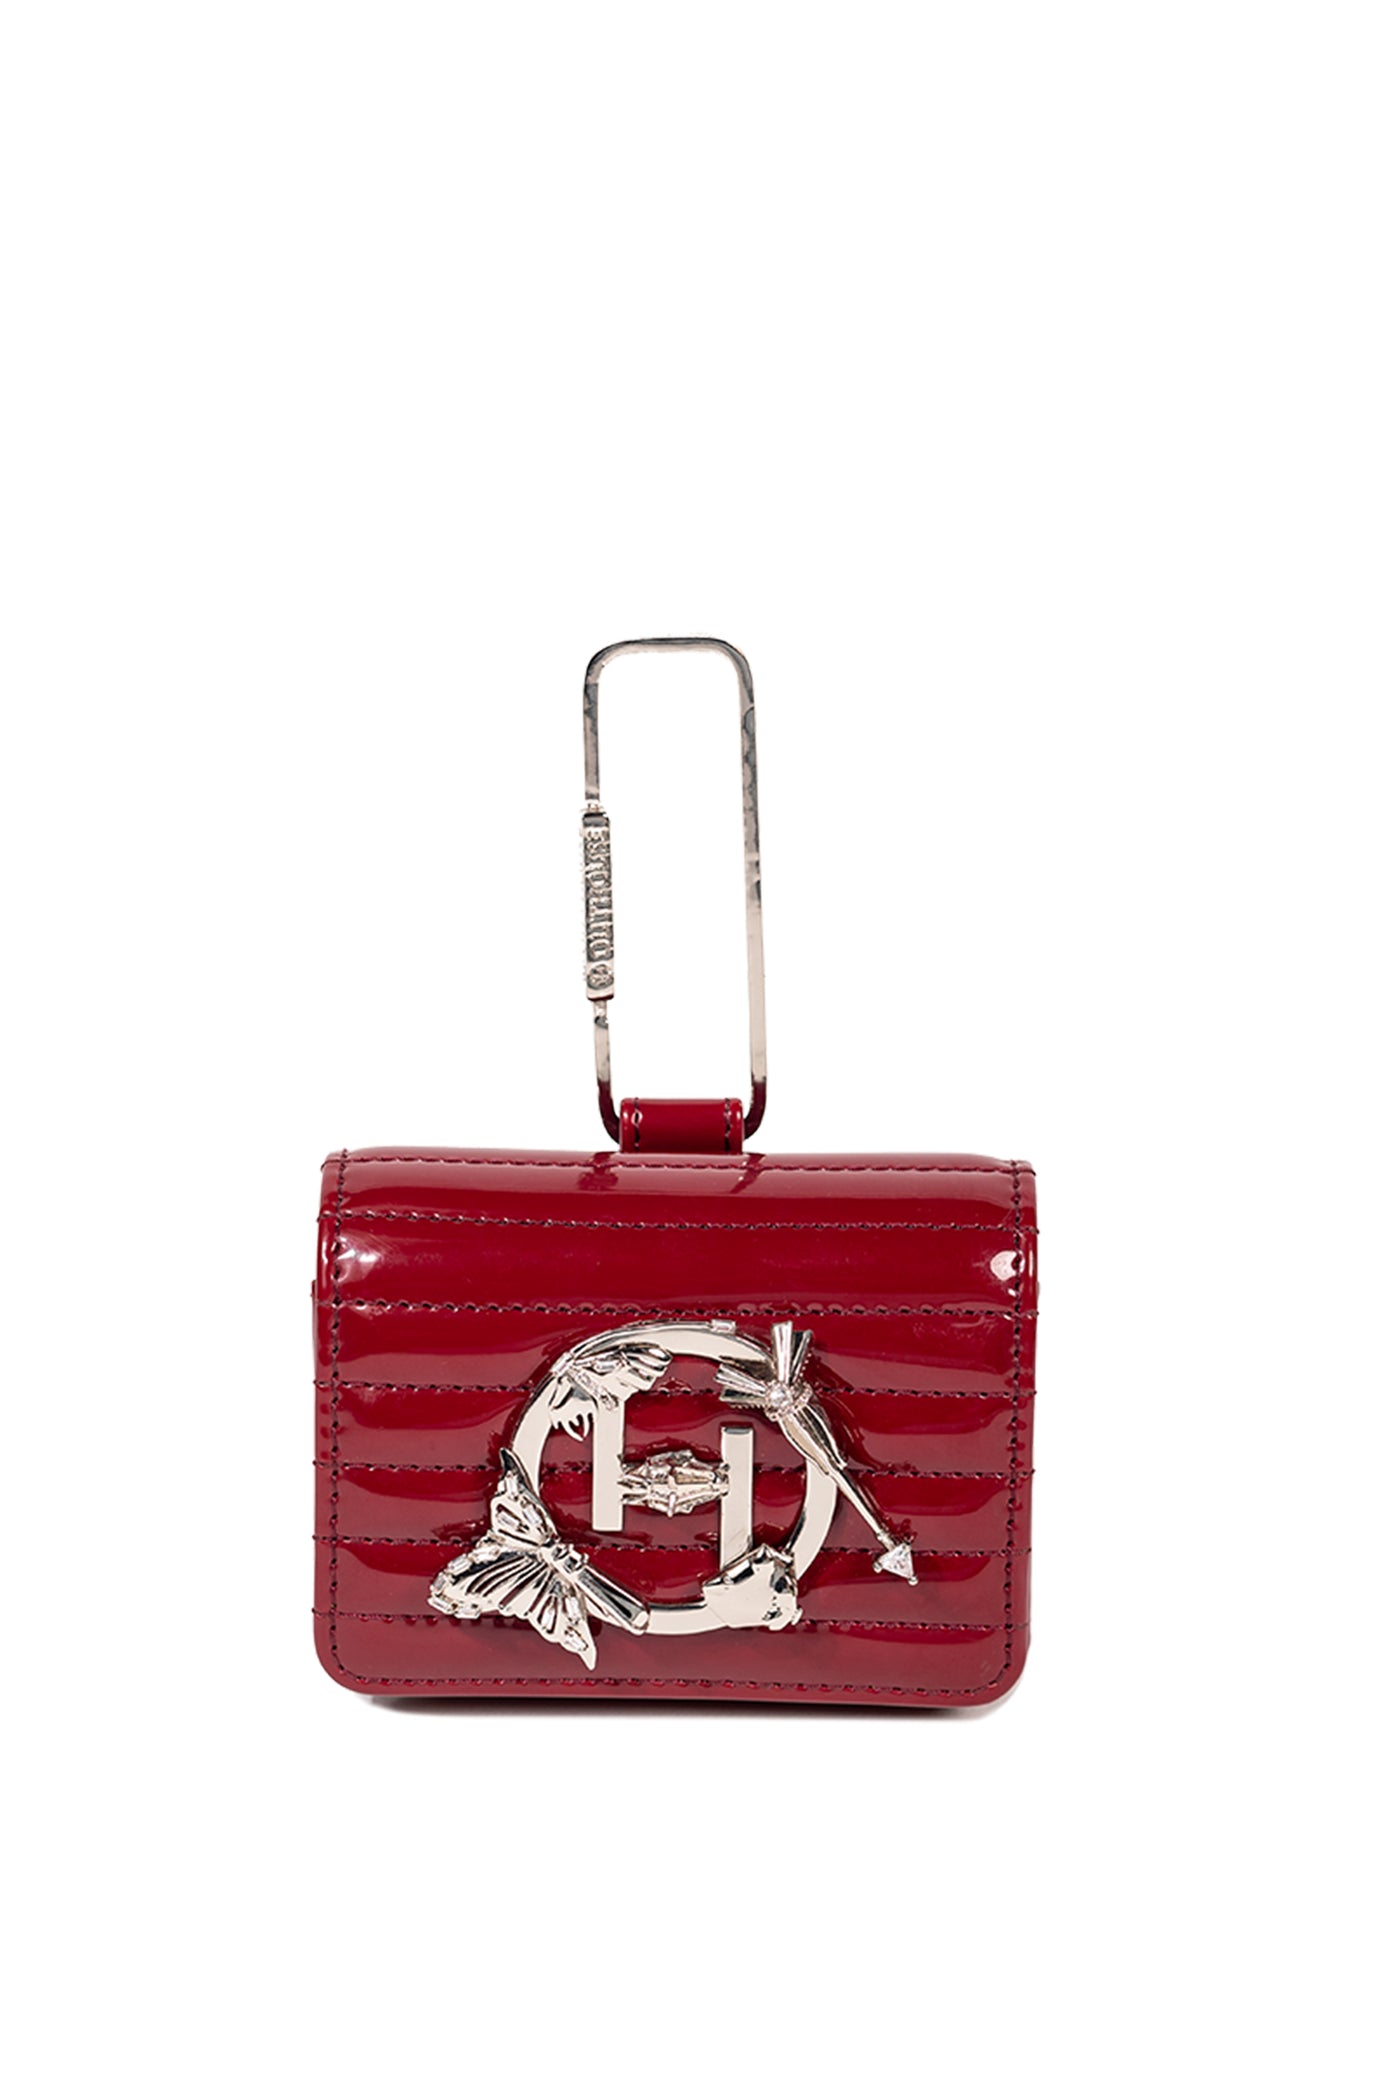 outhouse jewellery The Oh V Furbie - Marilyn Maroon bags accessories red online shopping melange singapore indian designer wear